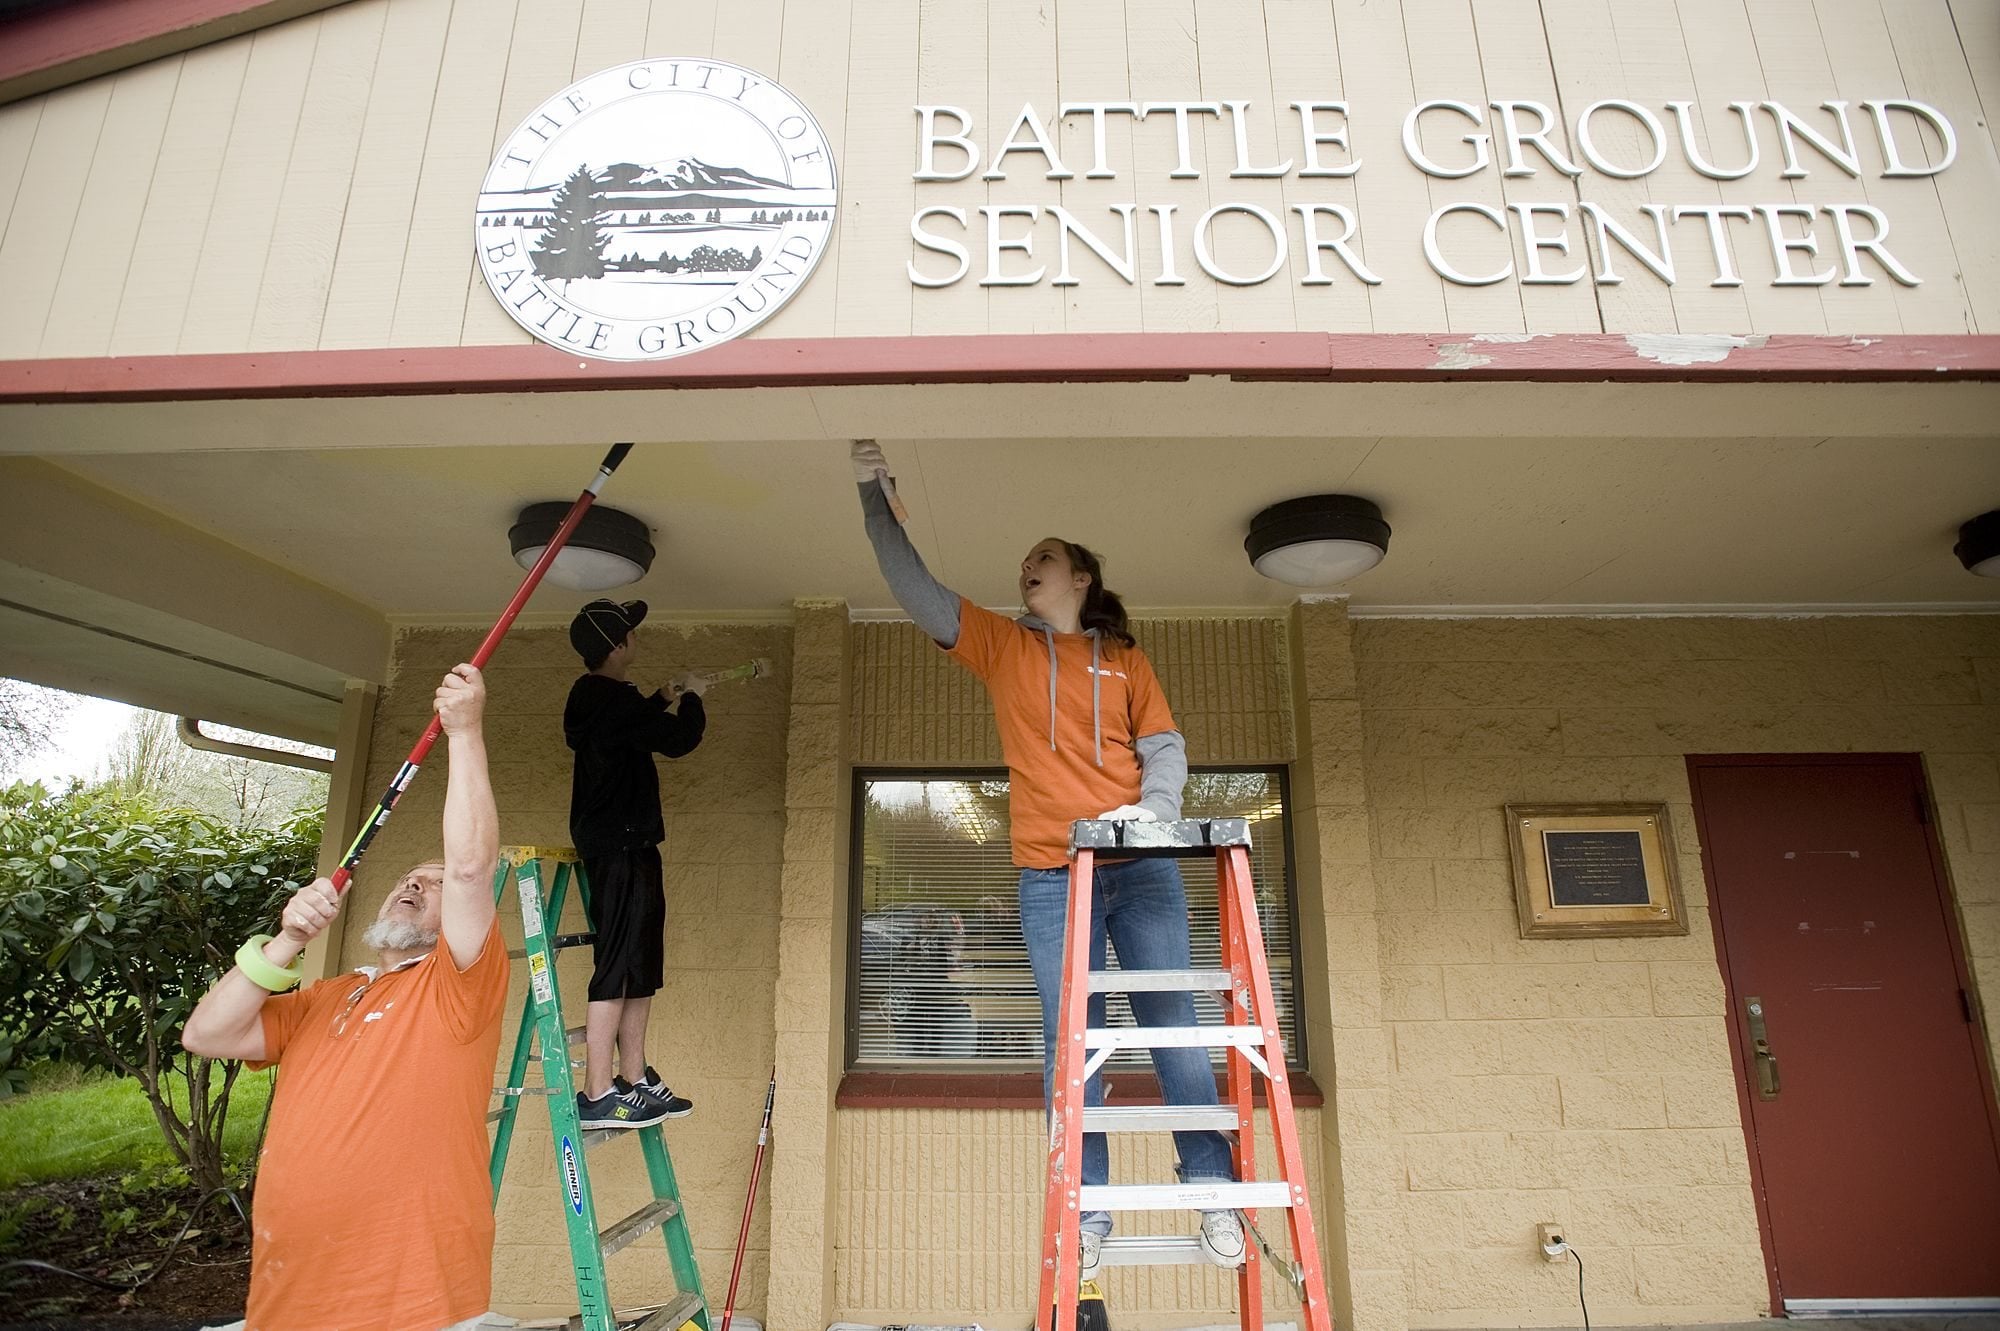 Volunteers Arturo Cortez, from left, Colby Gray, 13, and Kelsey Gray, 15, prime the Battle Ground Senior Center for a paint job.